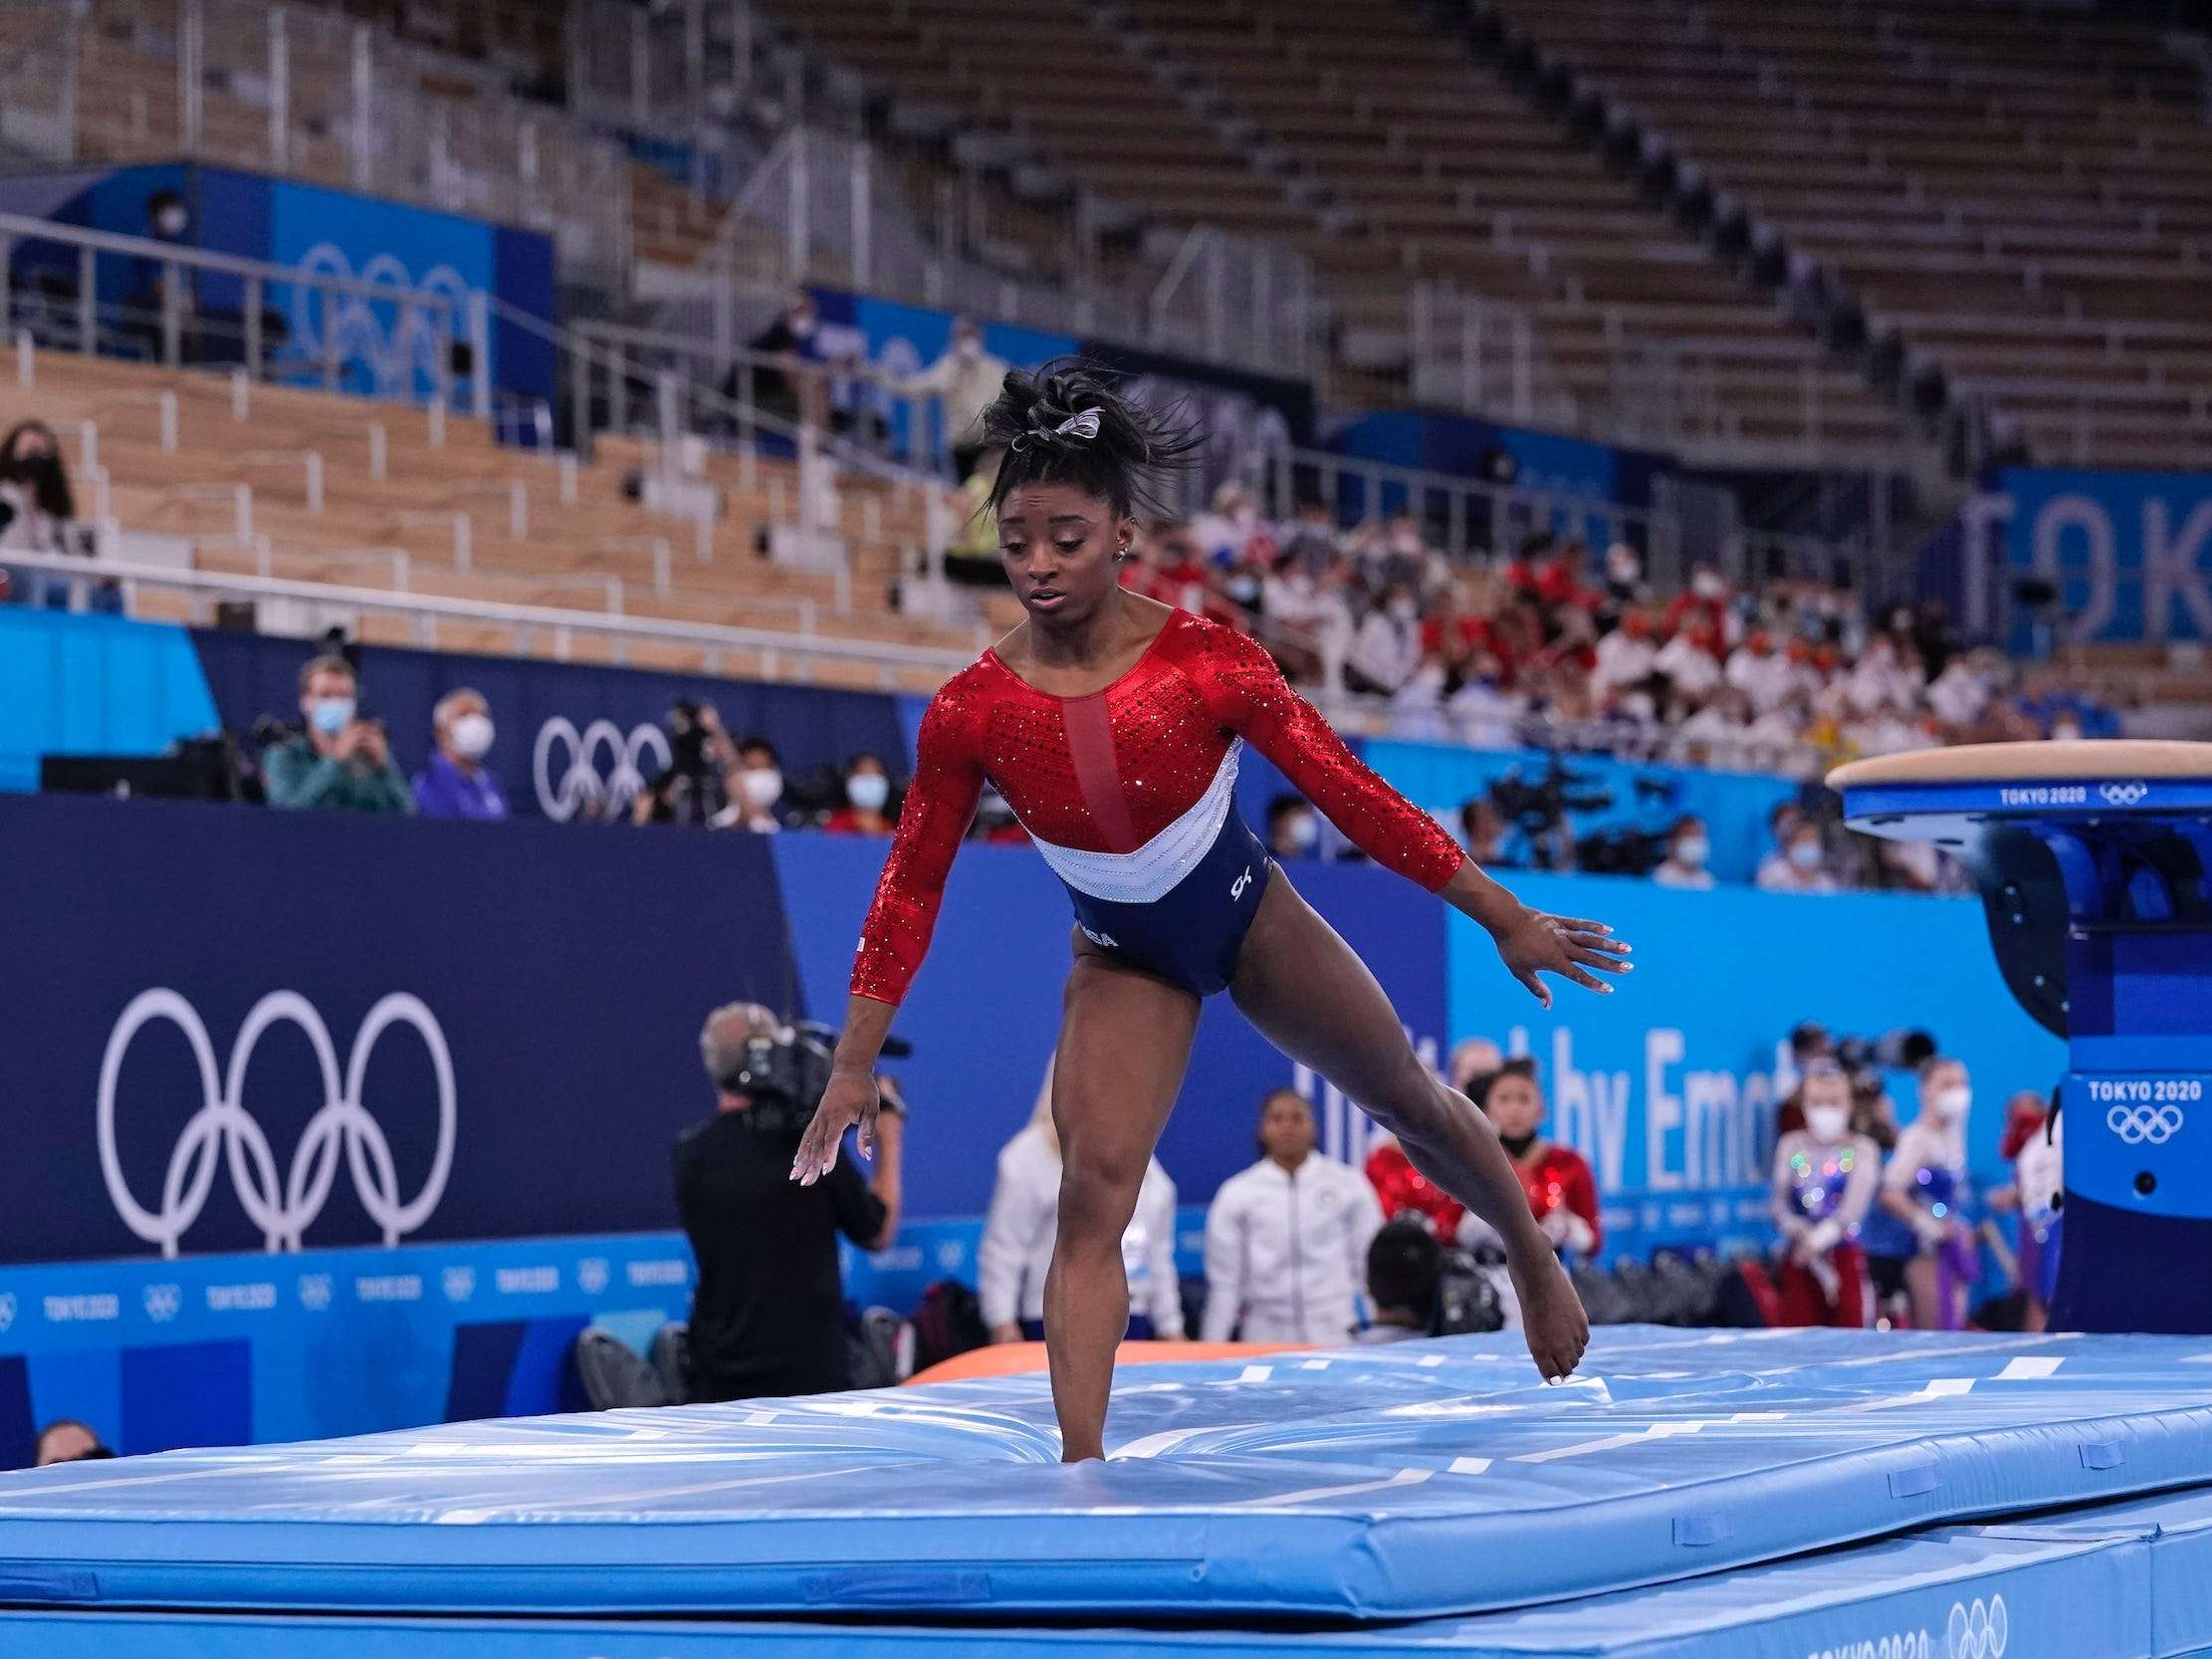 Simone Biles coached and cheered on her Team USA teammates after